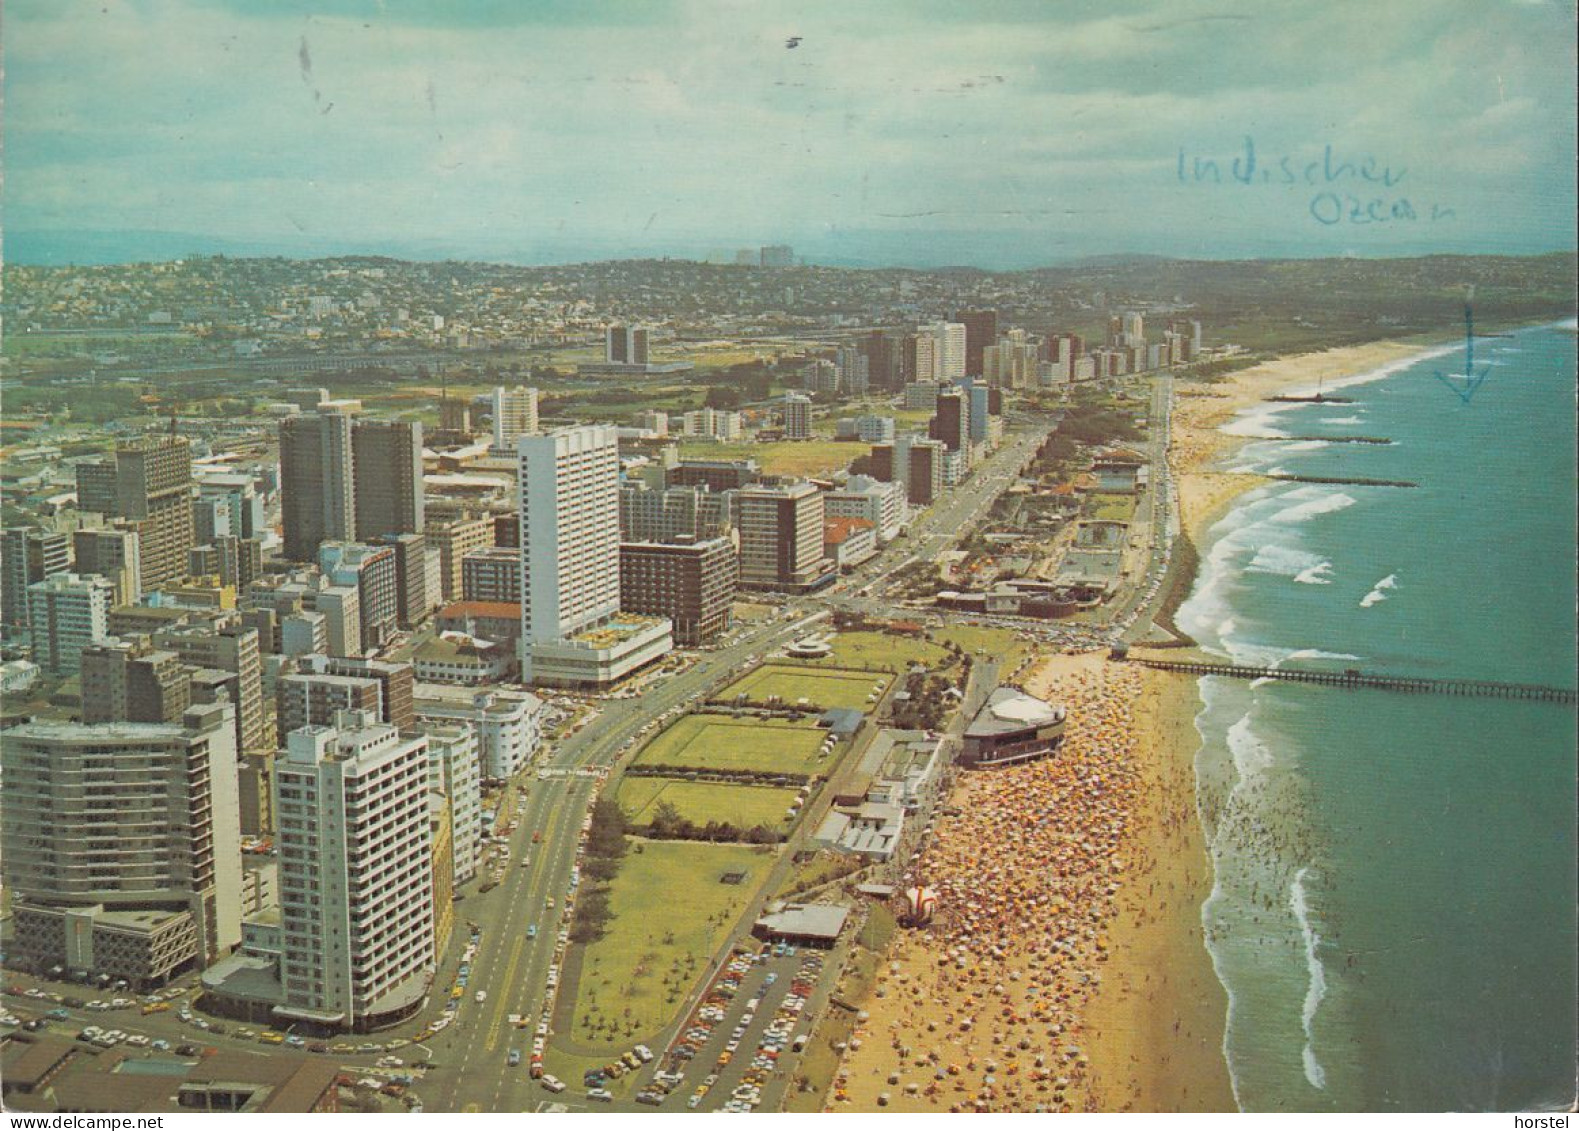 South Africa - Durban - "The Golden Mile" - Coast - Aerial View - Nice Stamp - South Africa